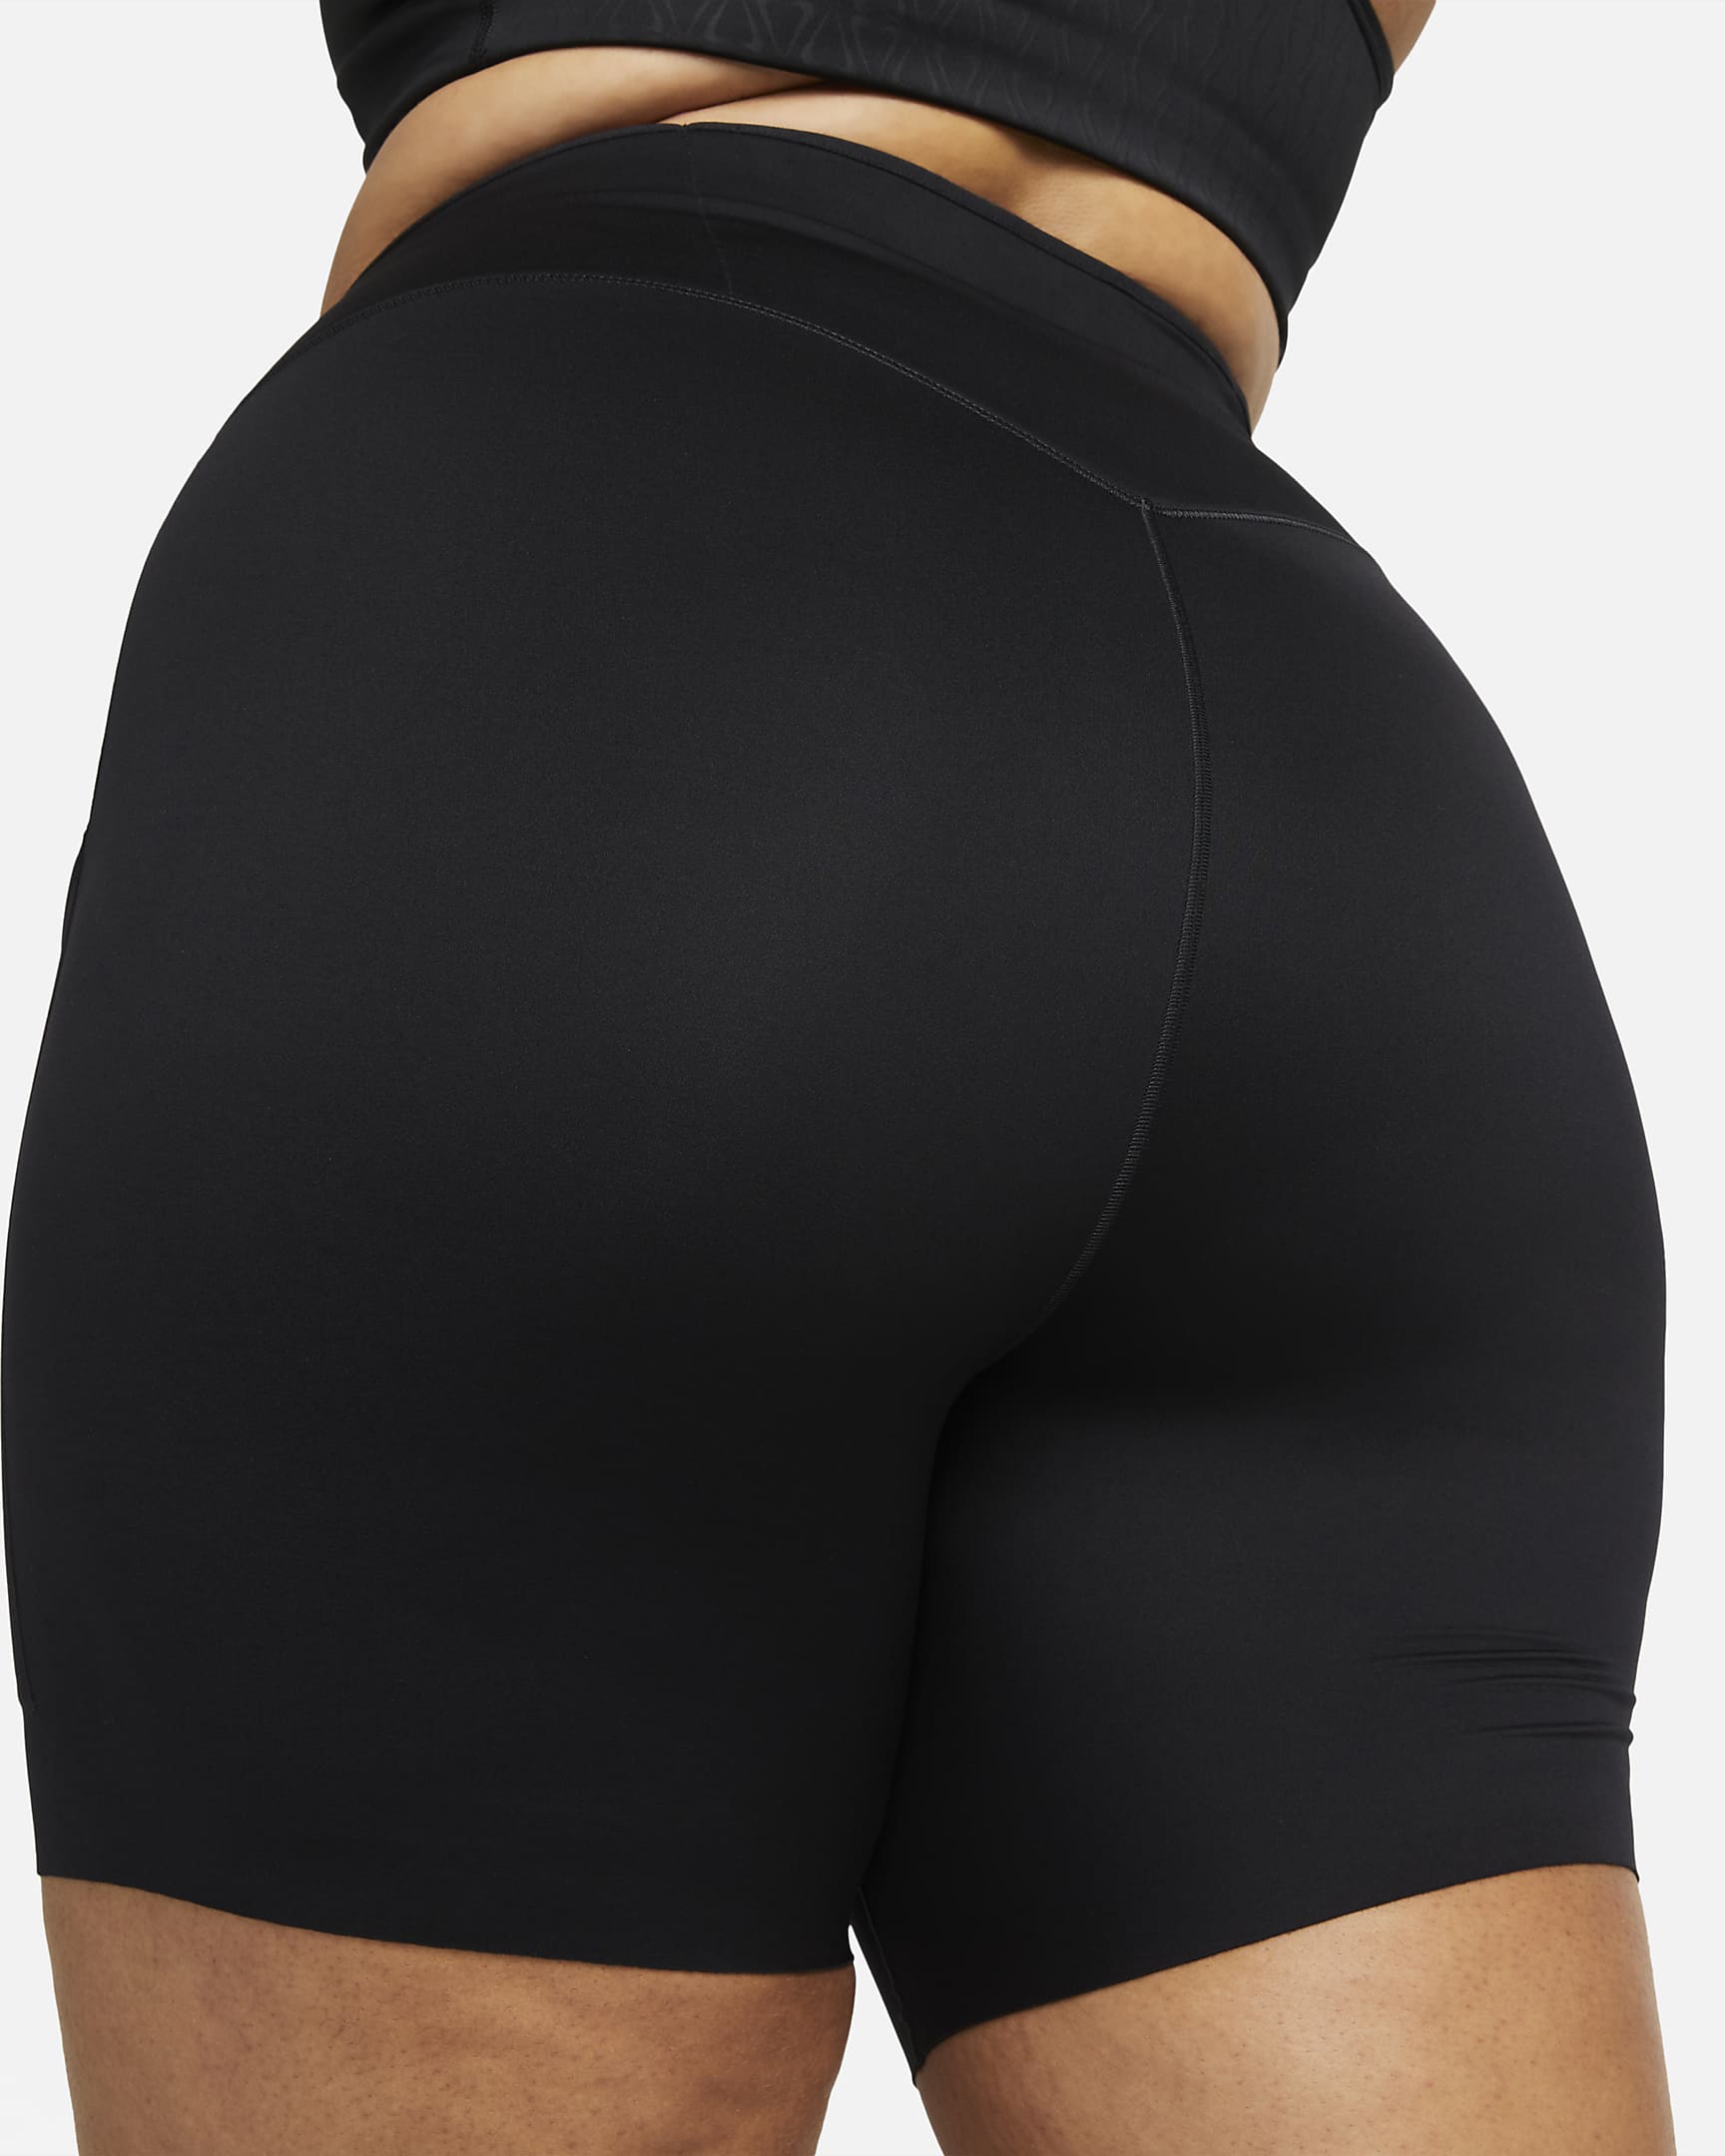 Nike Go Women's Firm-Support High-Waisted 8" Biker Shorts with Pockets (Plus Size) - Black/Black